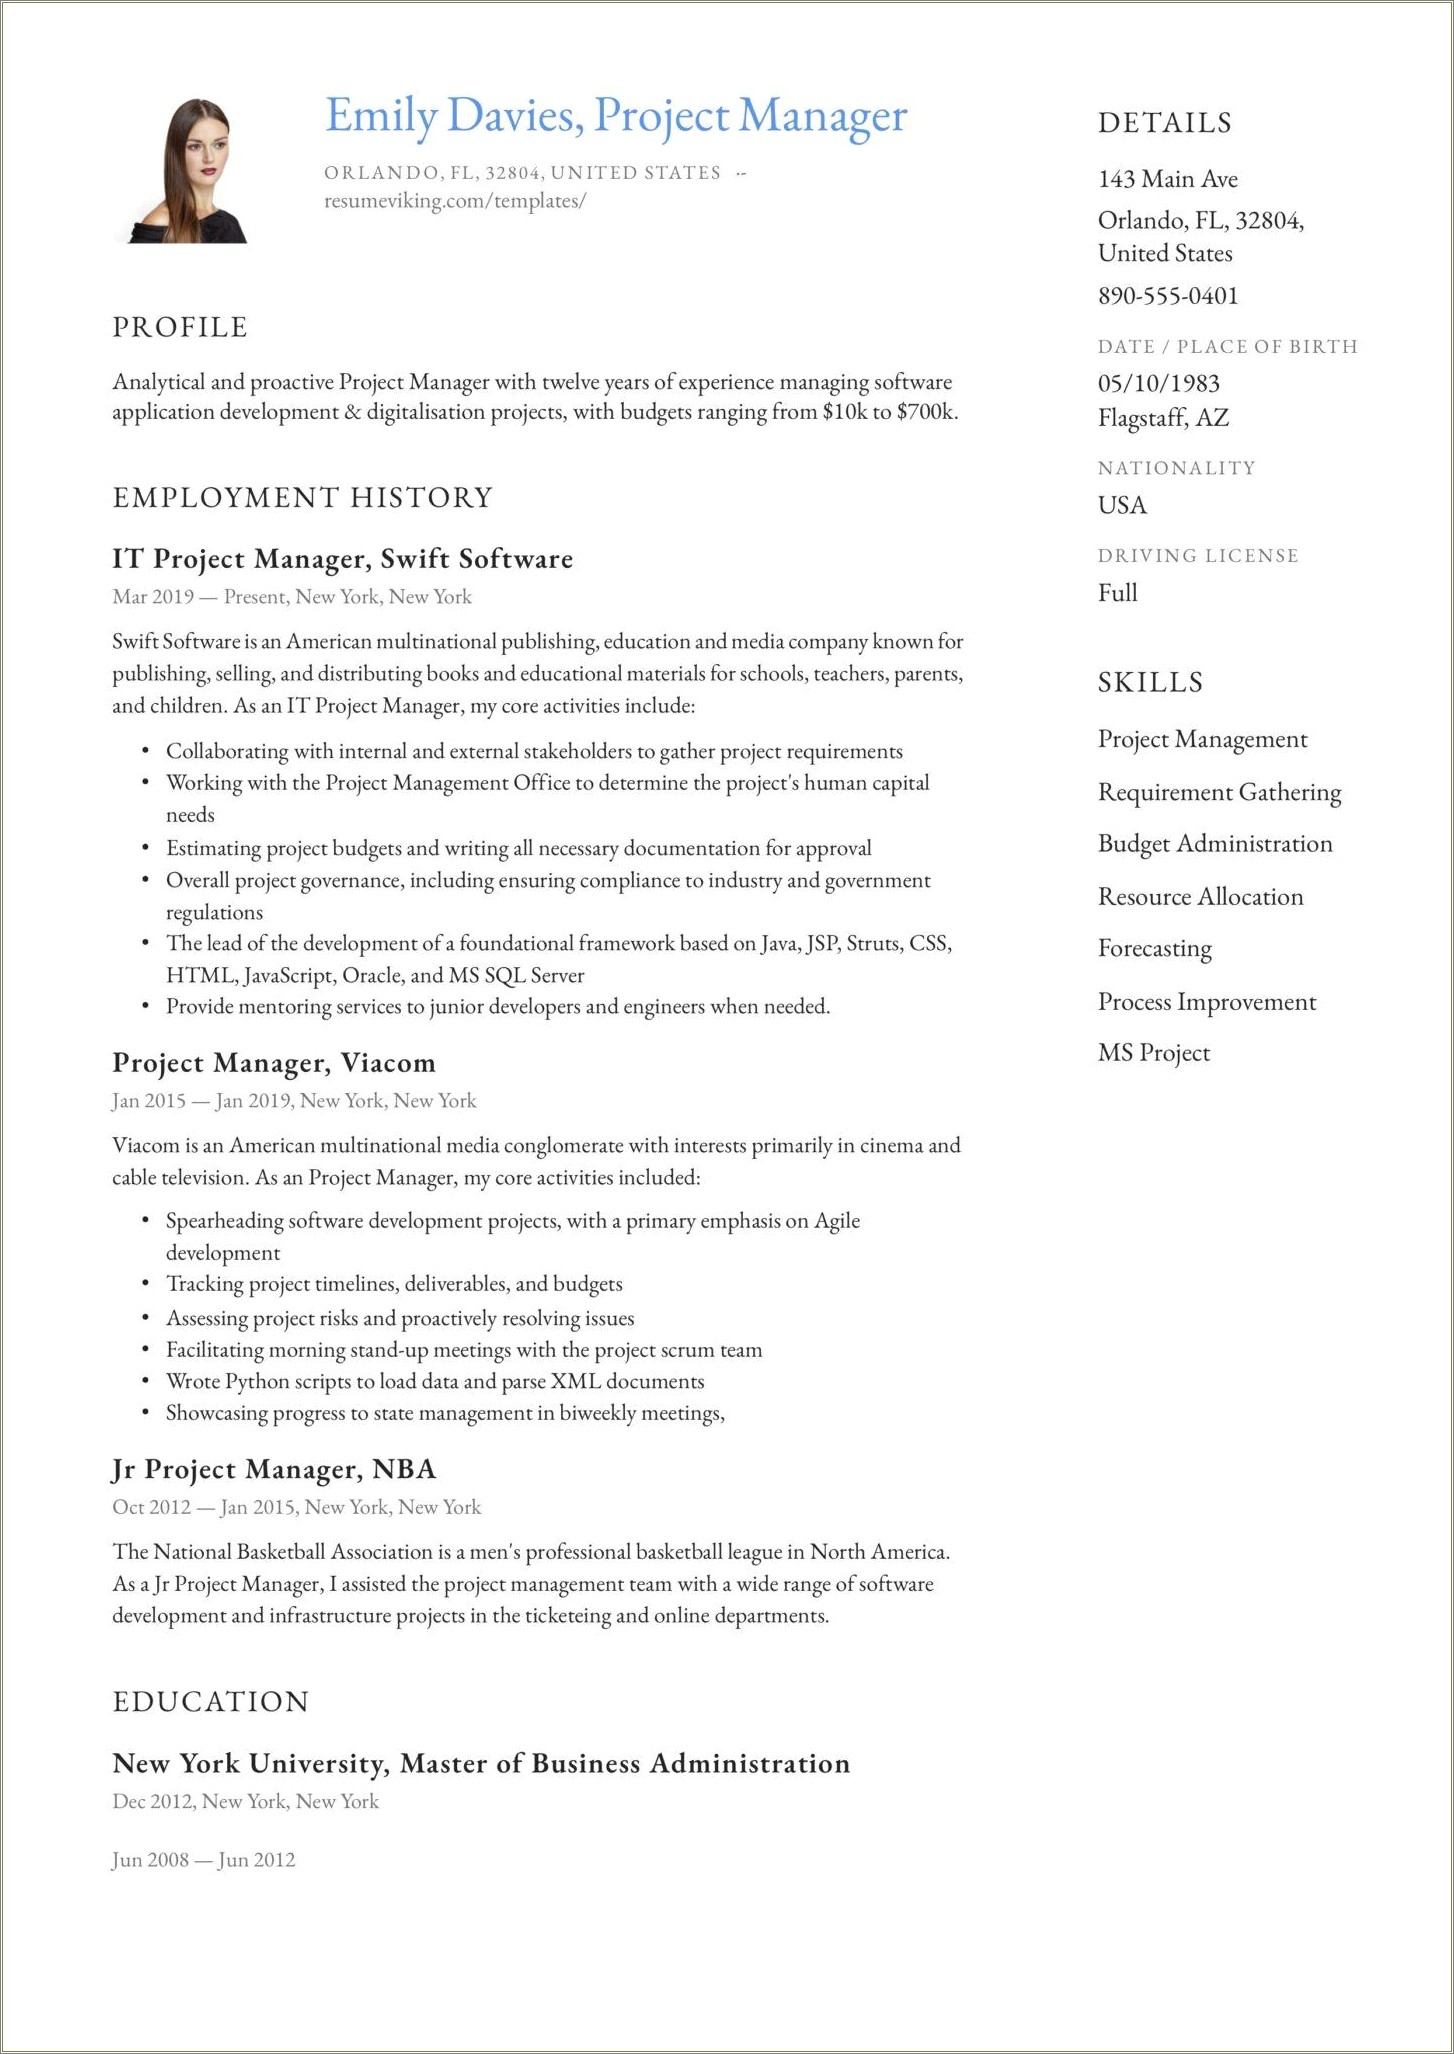 Sample Resume For A Construction Project Manager